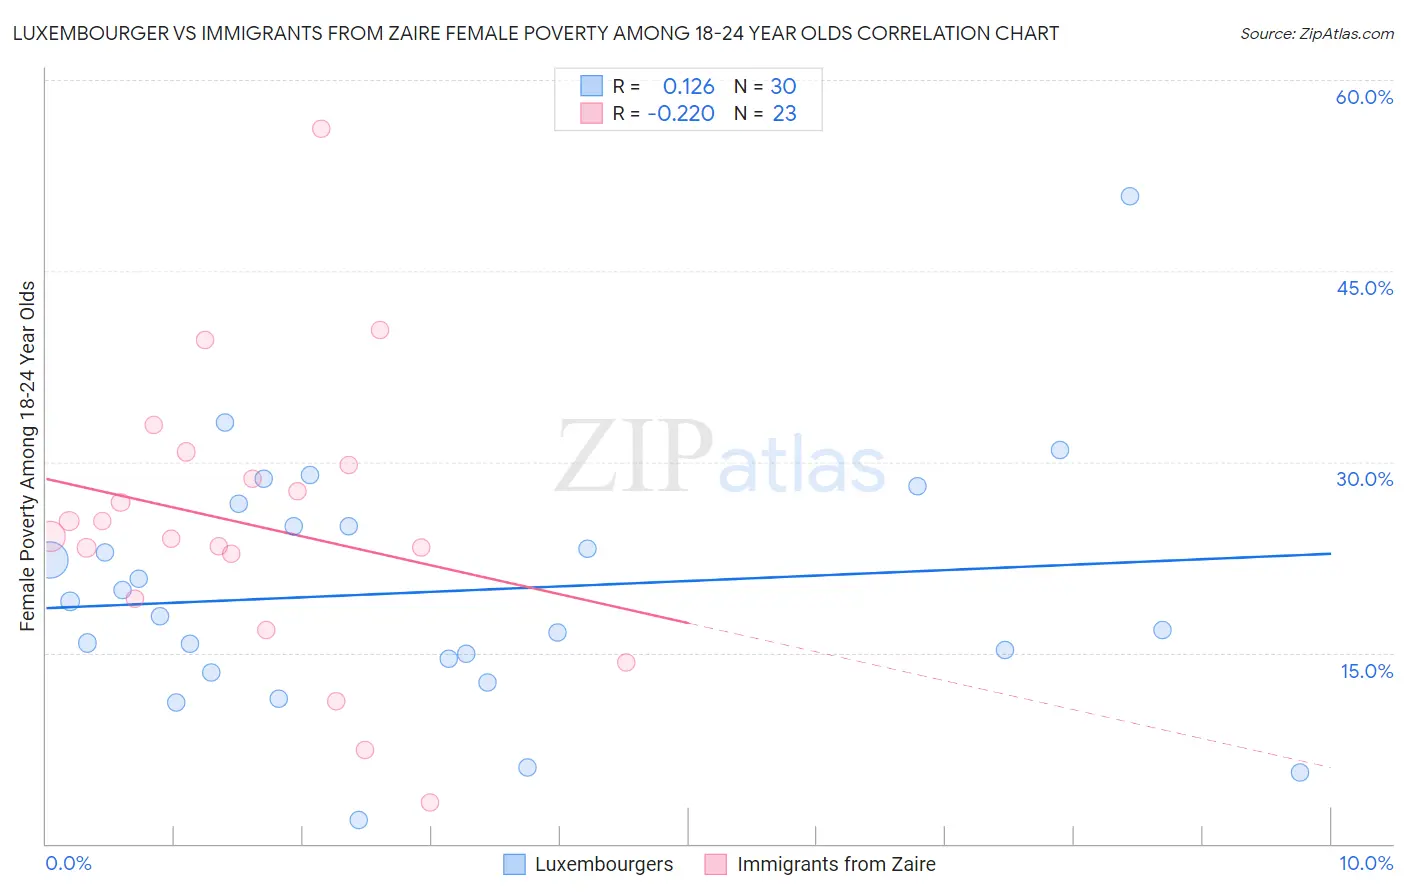 Luxembourger vs Immigrants from Zaire Female Poverty Among 18-24 Year Olds